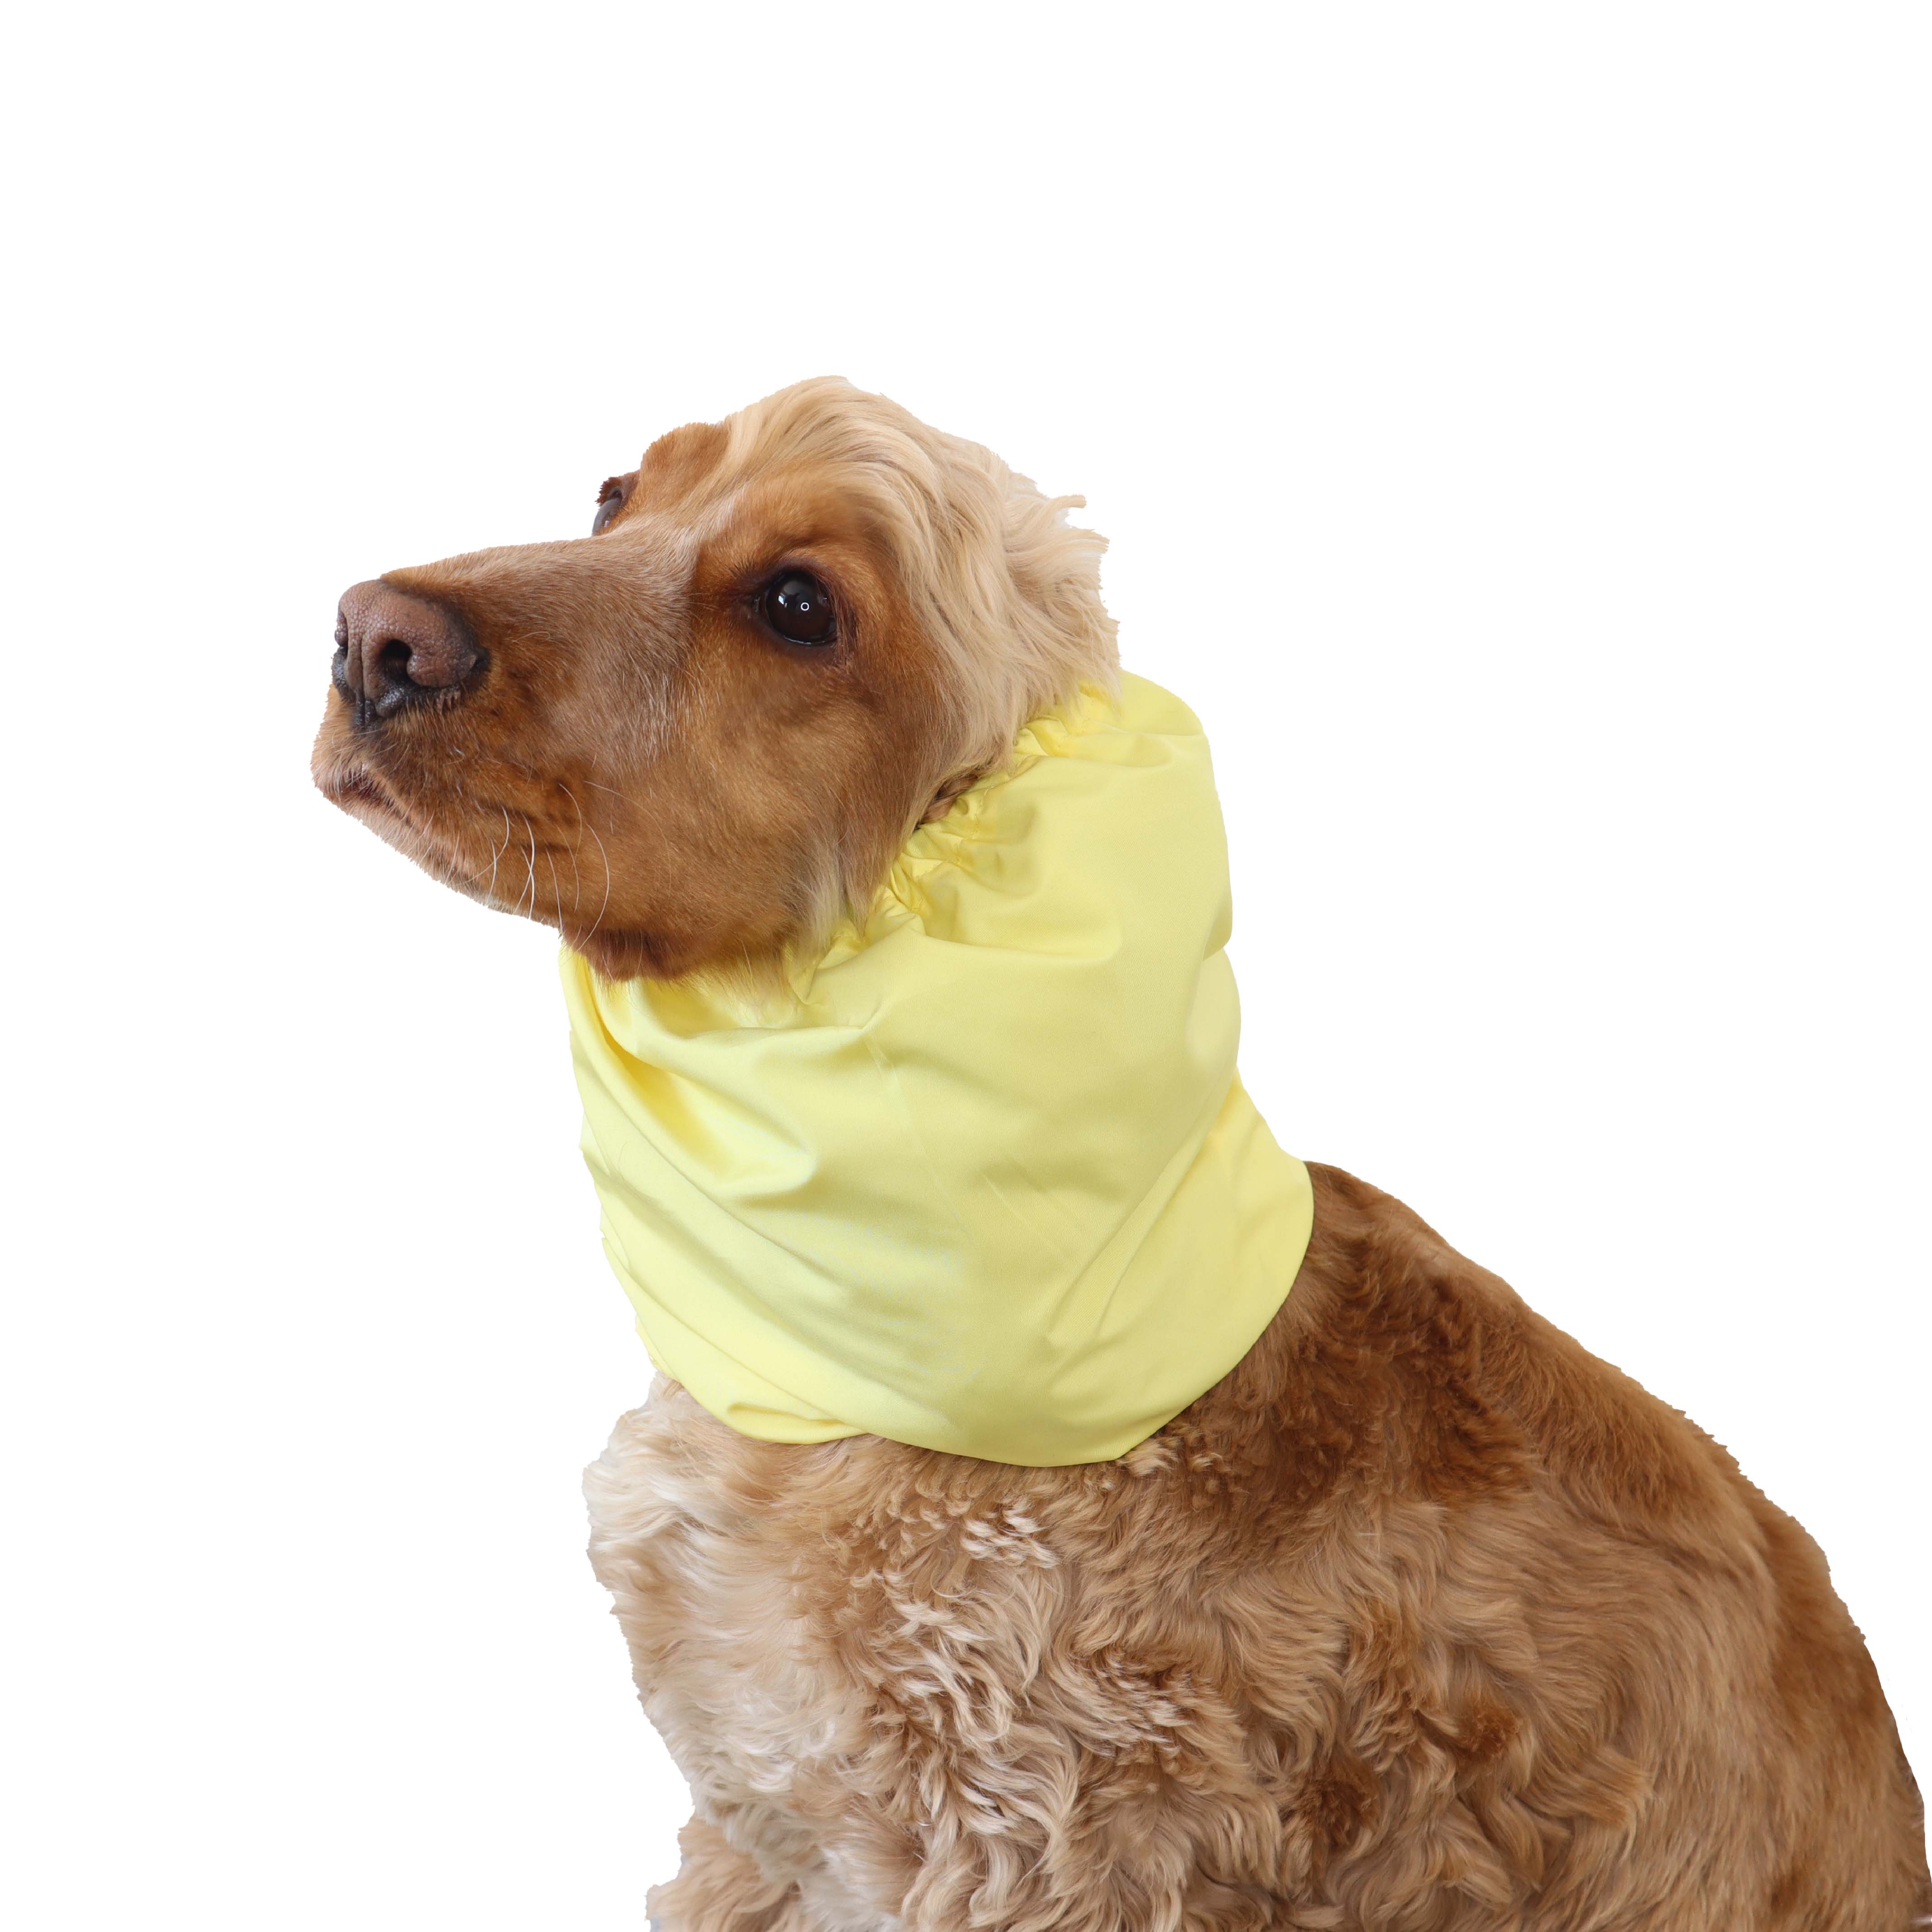 Long eared dog with snood by Distinguish Me